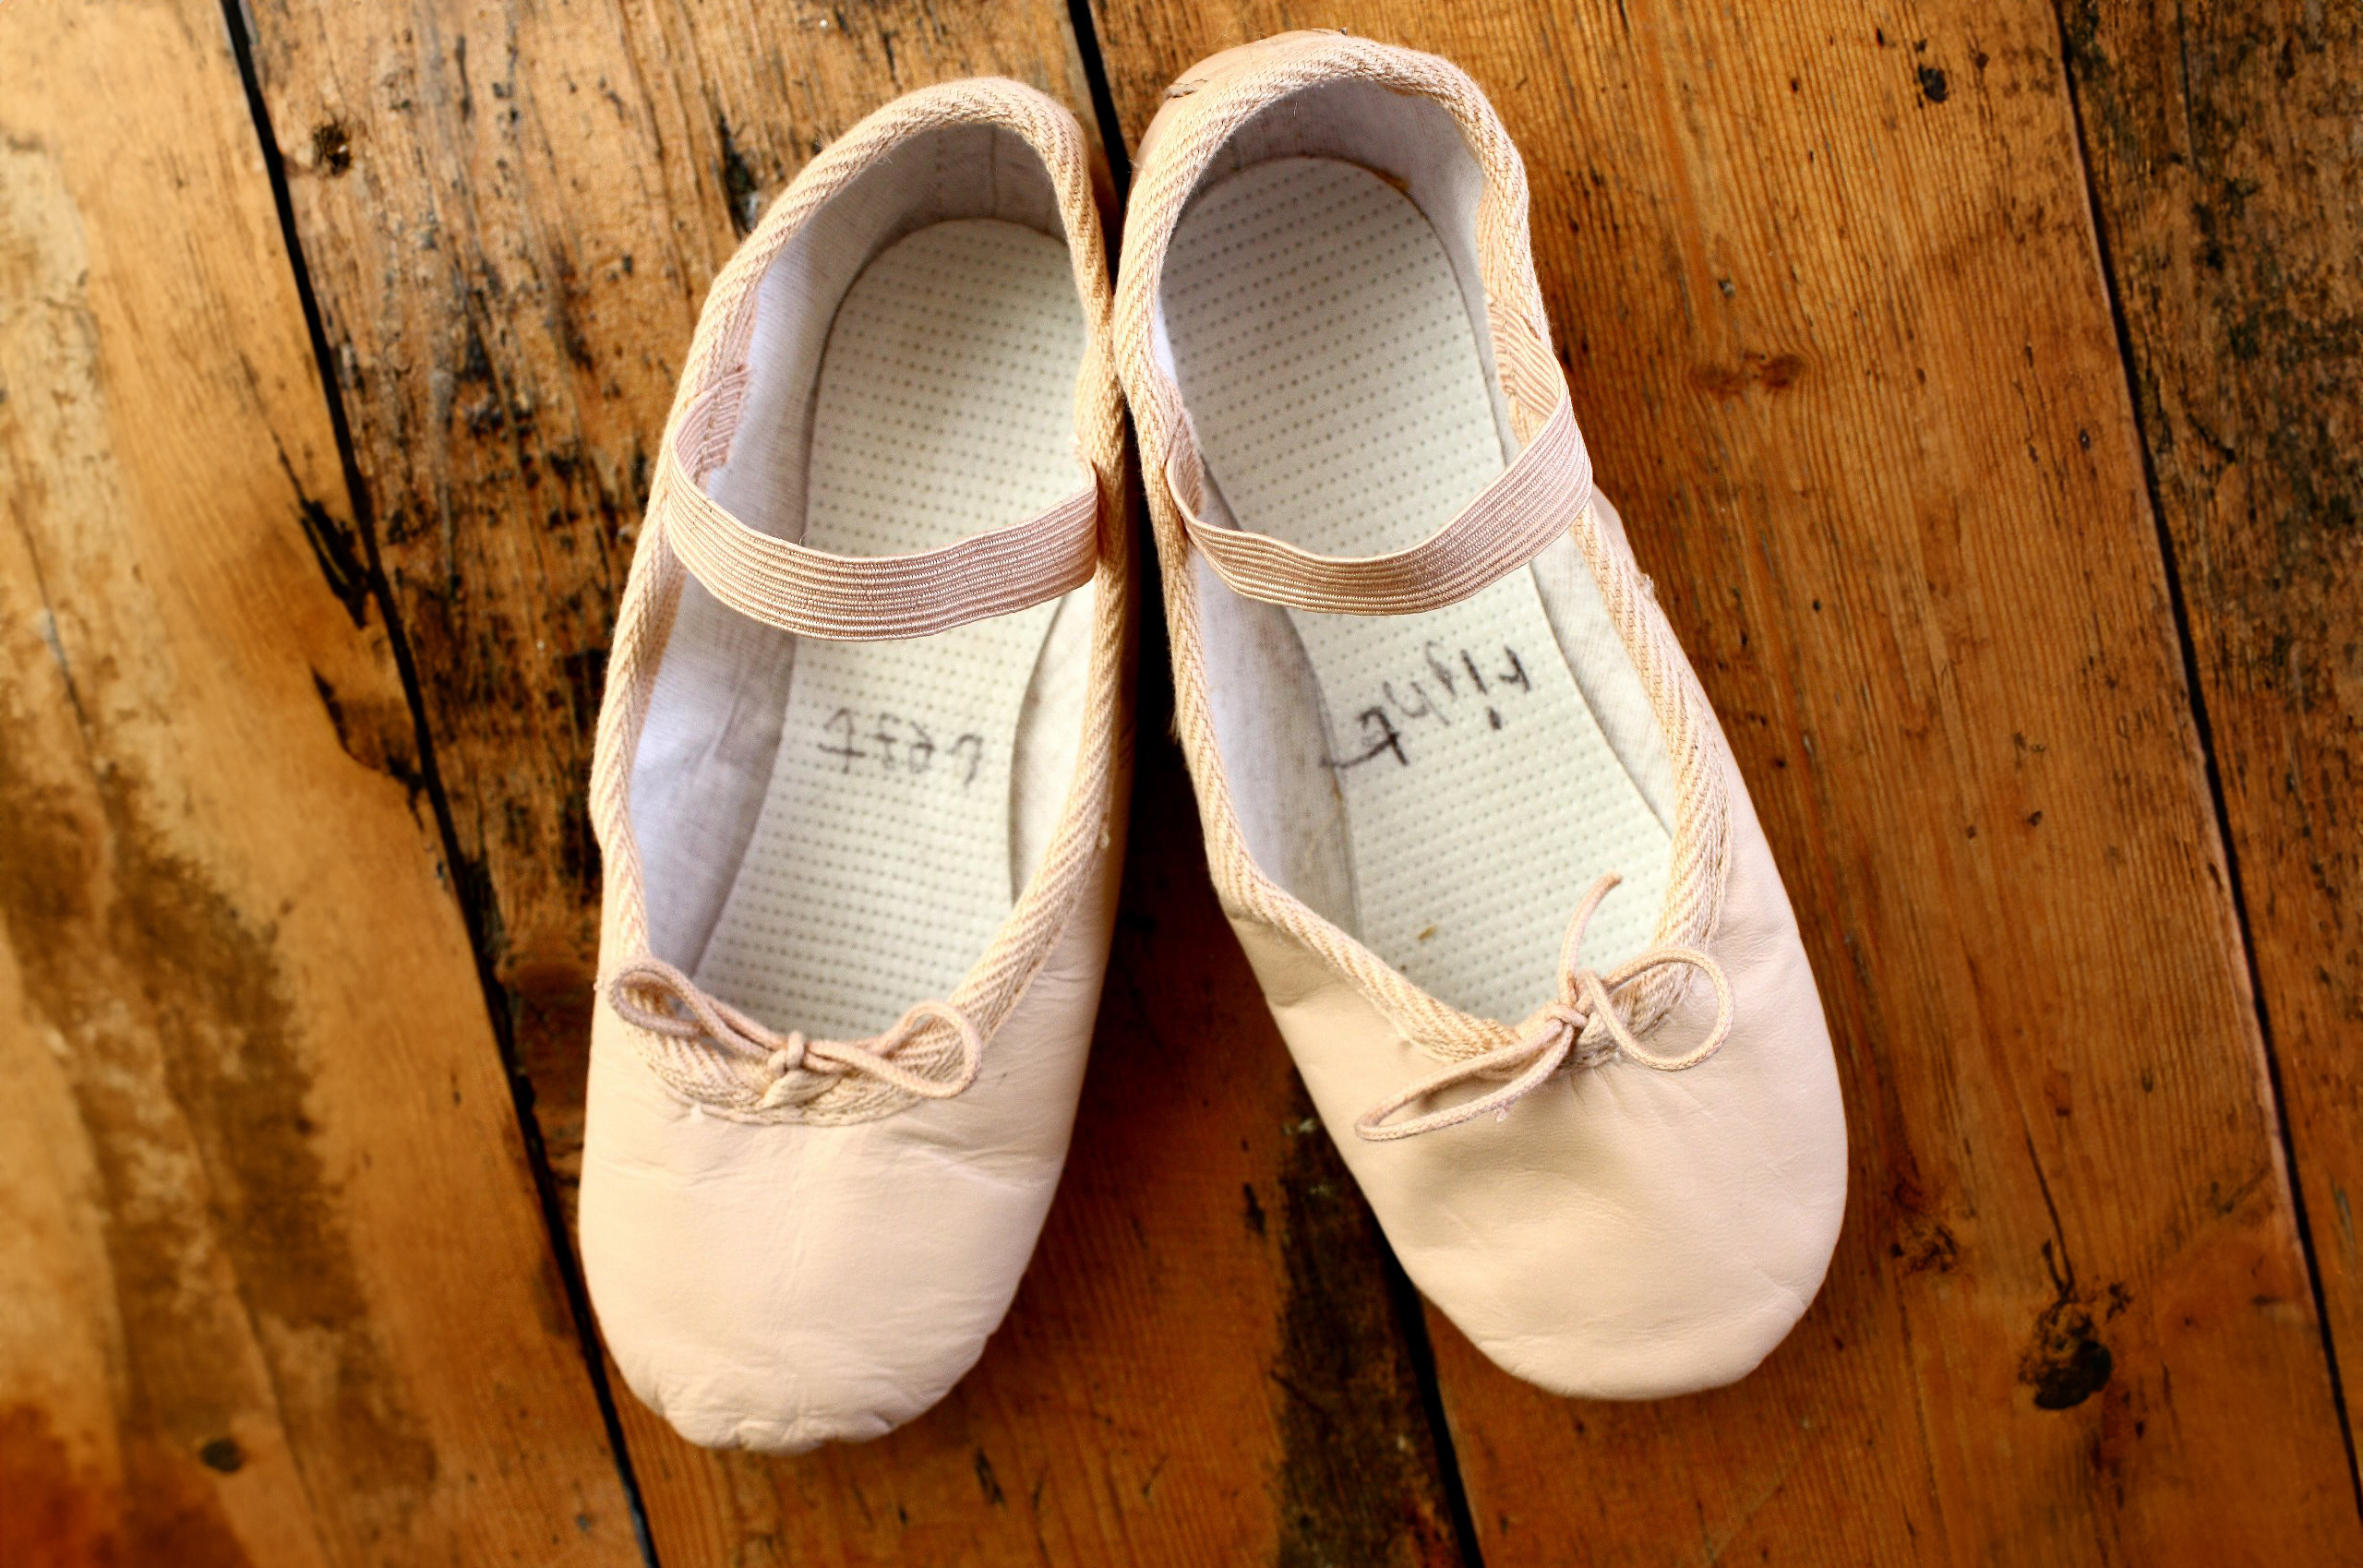 ballet shoes EDITED